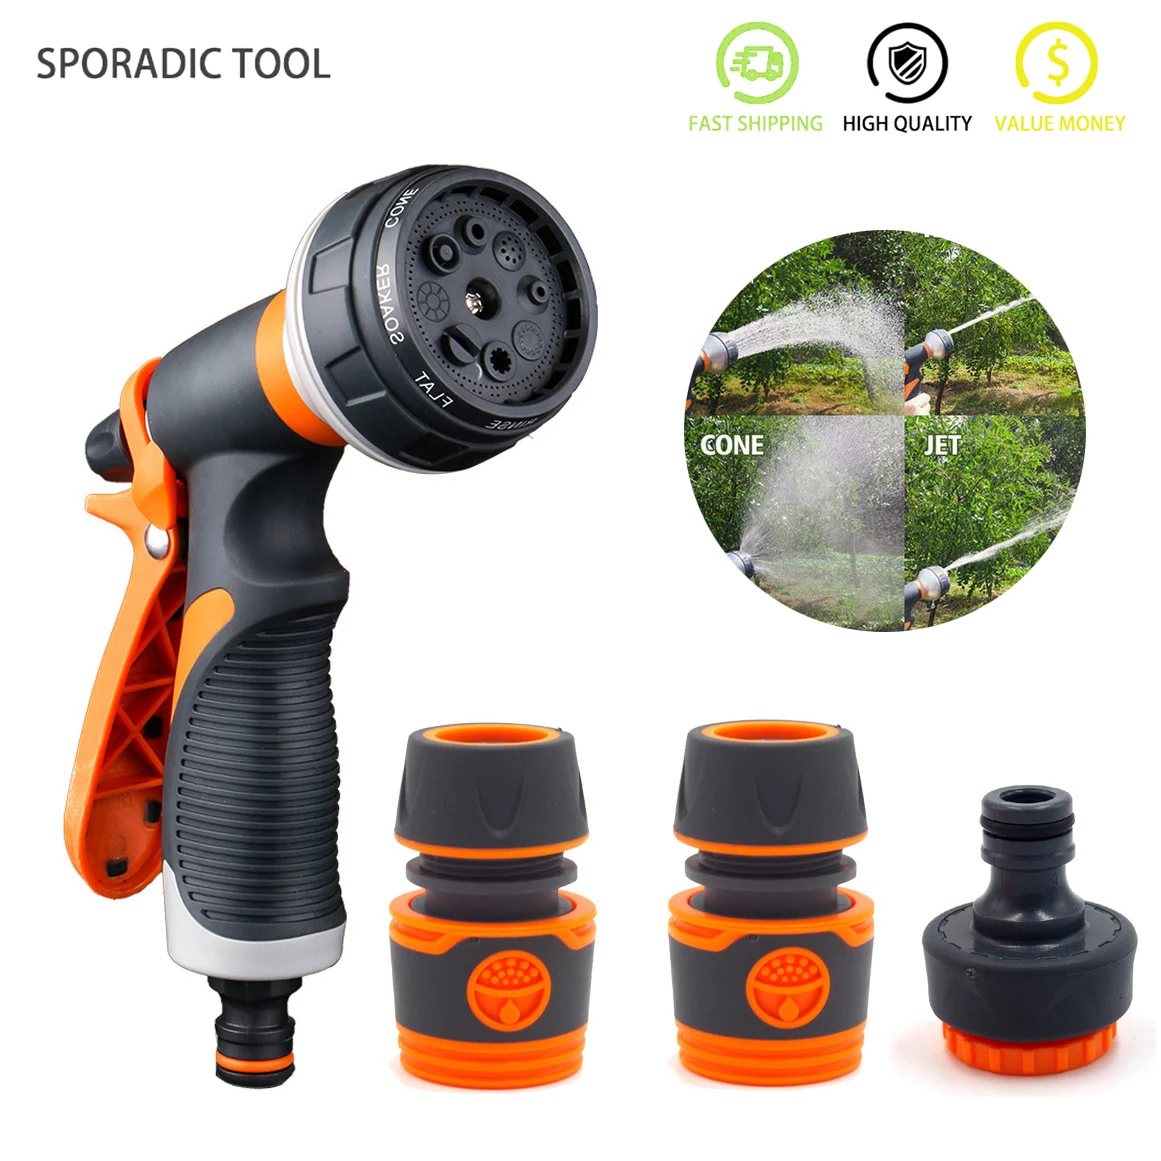 

4pcs/set gardening Sprinklers Washing High Power Pressure Hose Nozzle Washer Water Spray Gun With Quick Connect Adapters Faucet